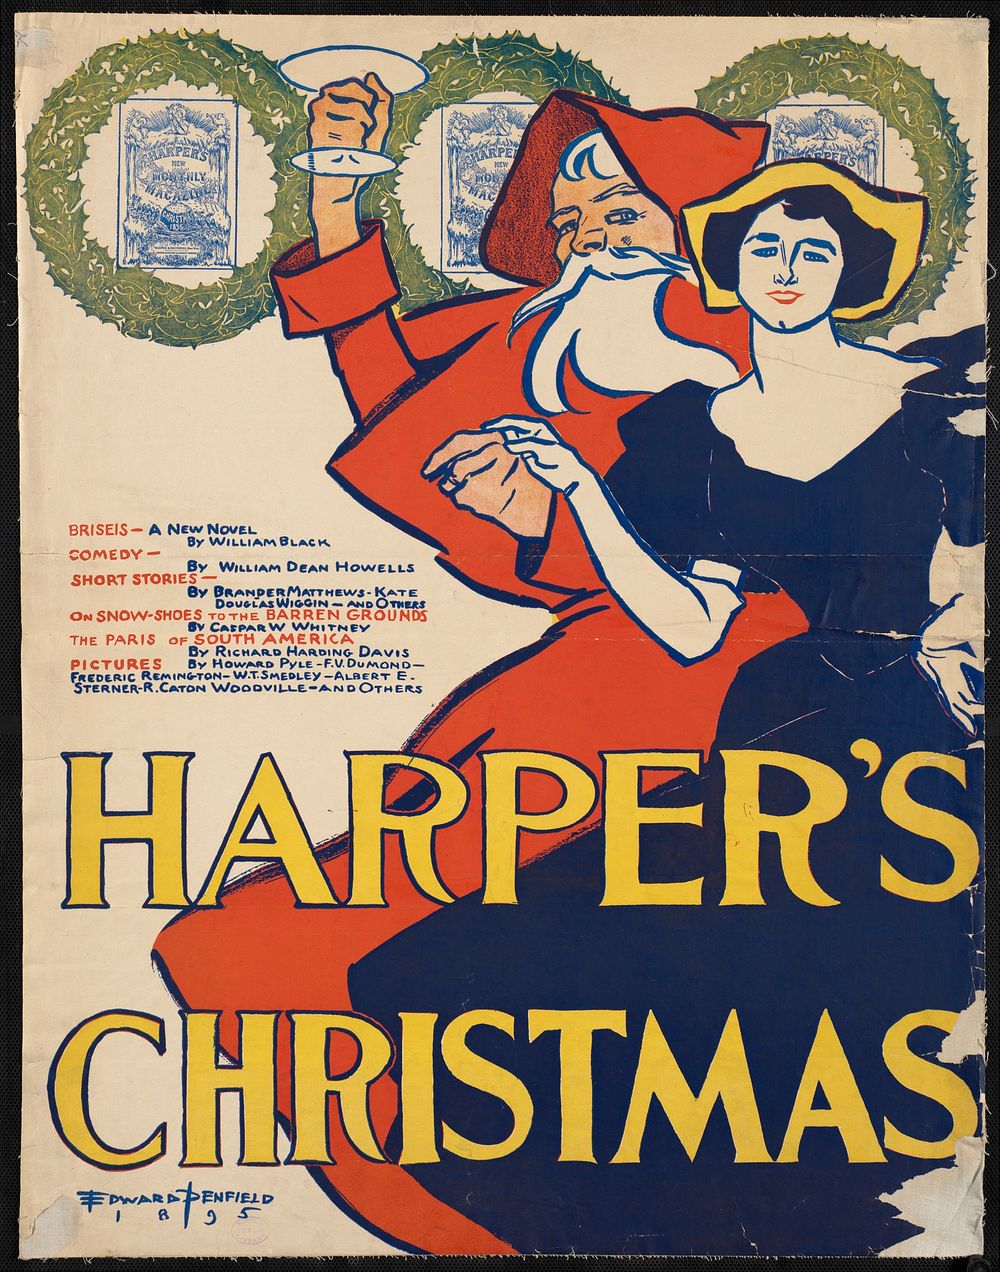             Harper's Christmas           by Edward Penfield